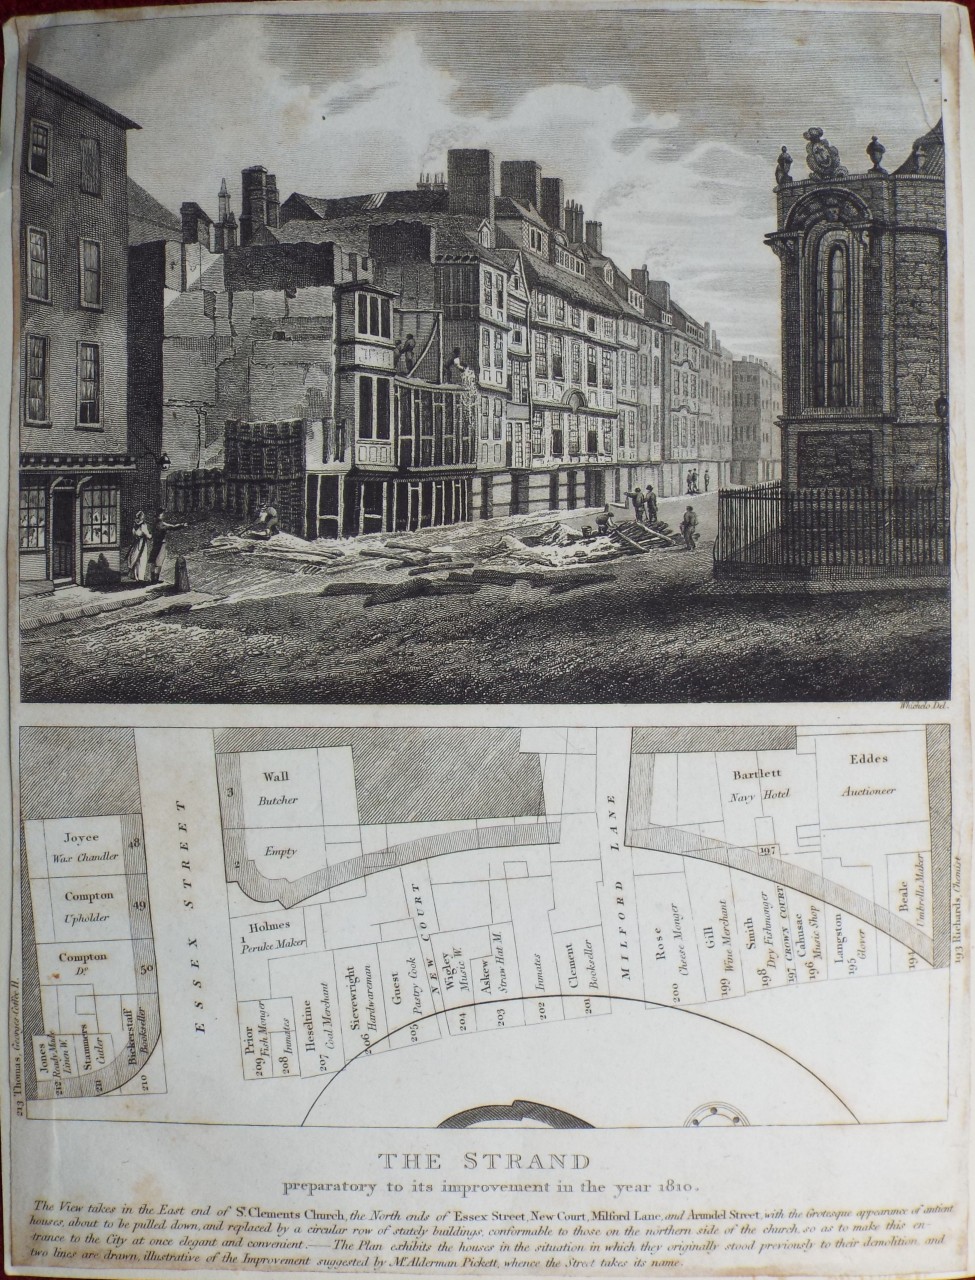 Print - The Strand preparatory to its improvement in the year 1810.